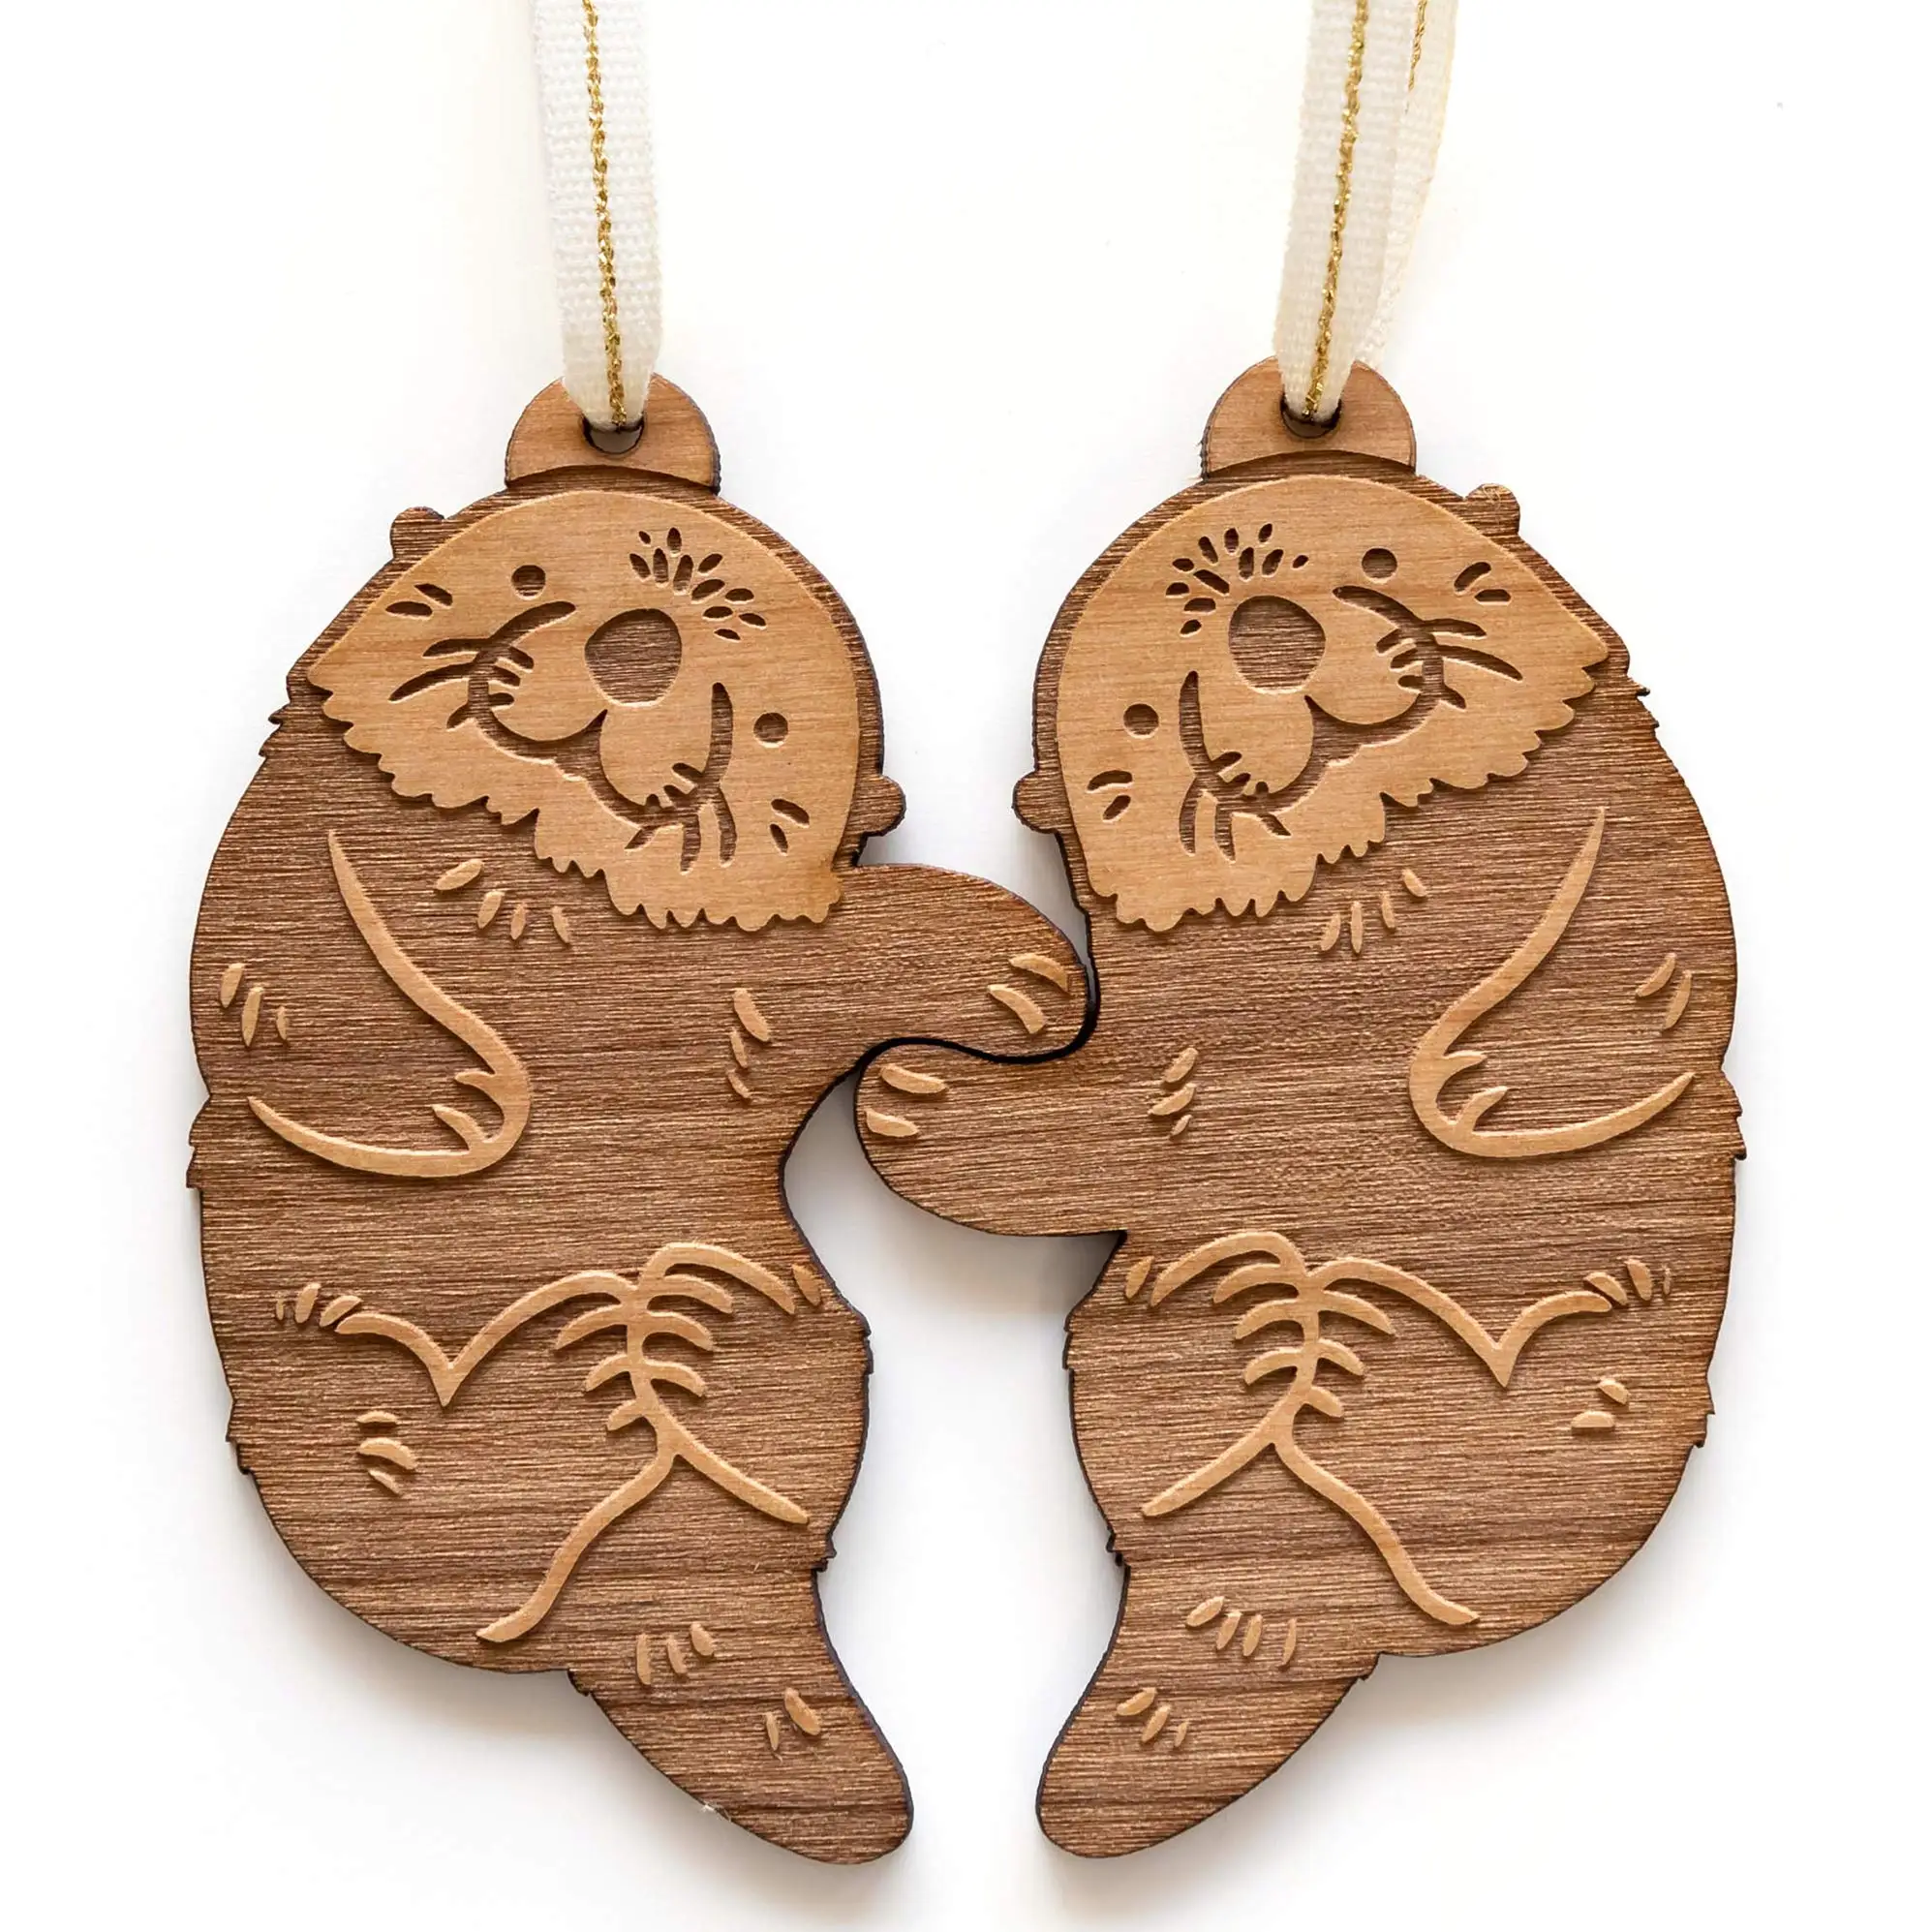 

Otters Pair Laser Cut Wood Ornaments Christmas Holiday Love Anniversary Personalized Gifts Custom Message Stocking Stuffers